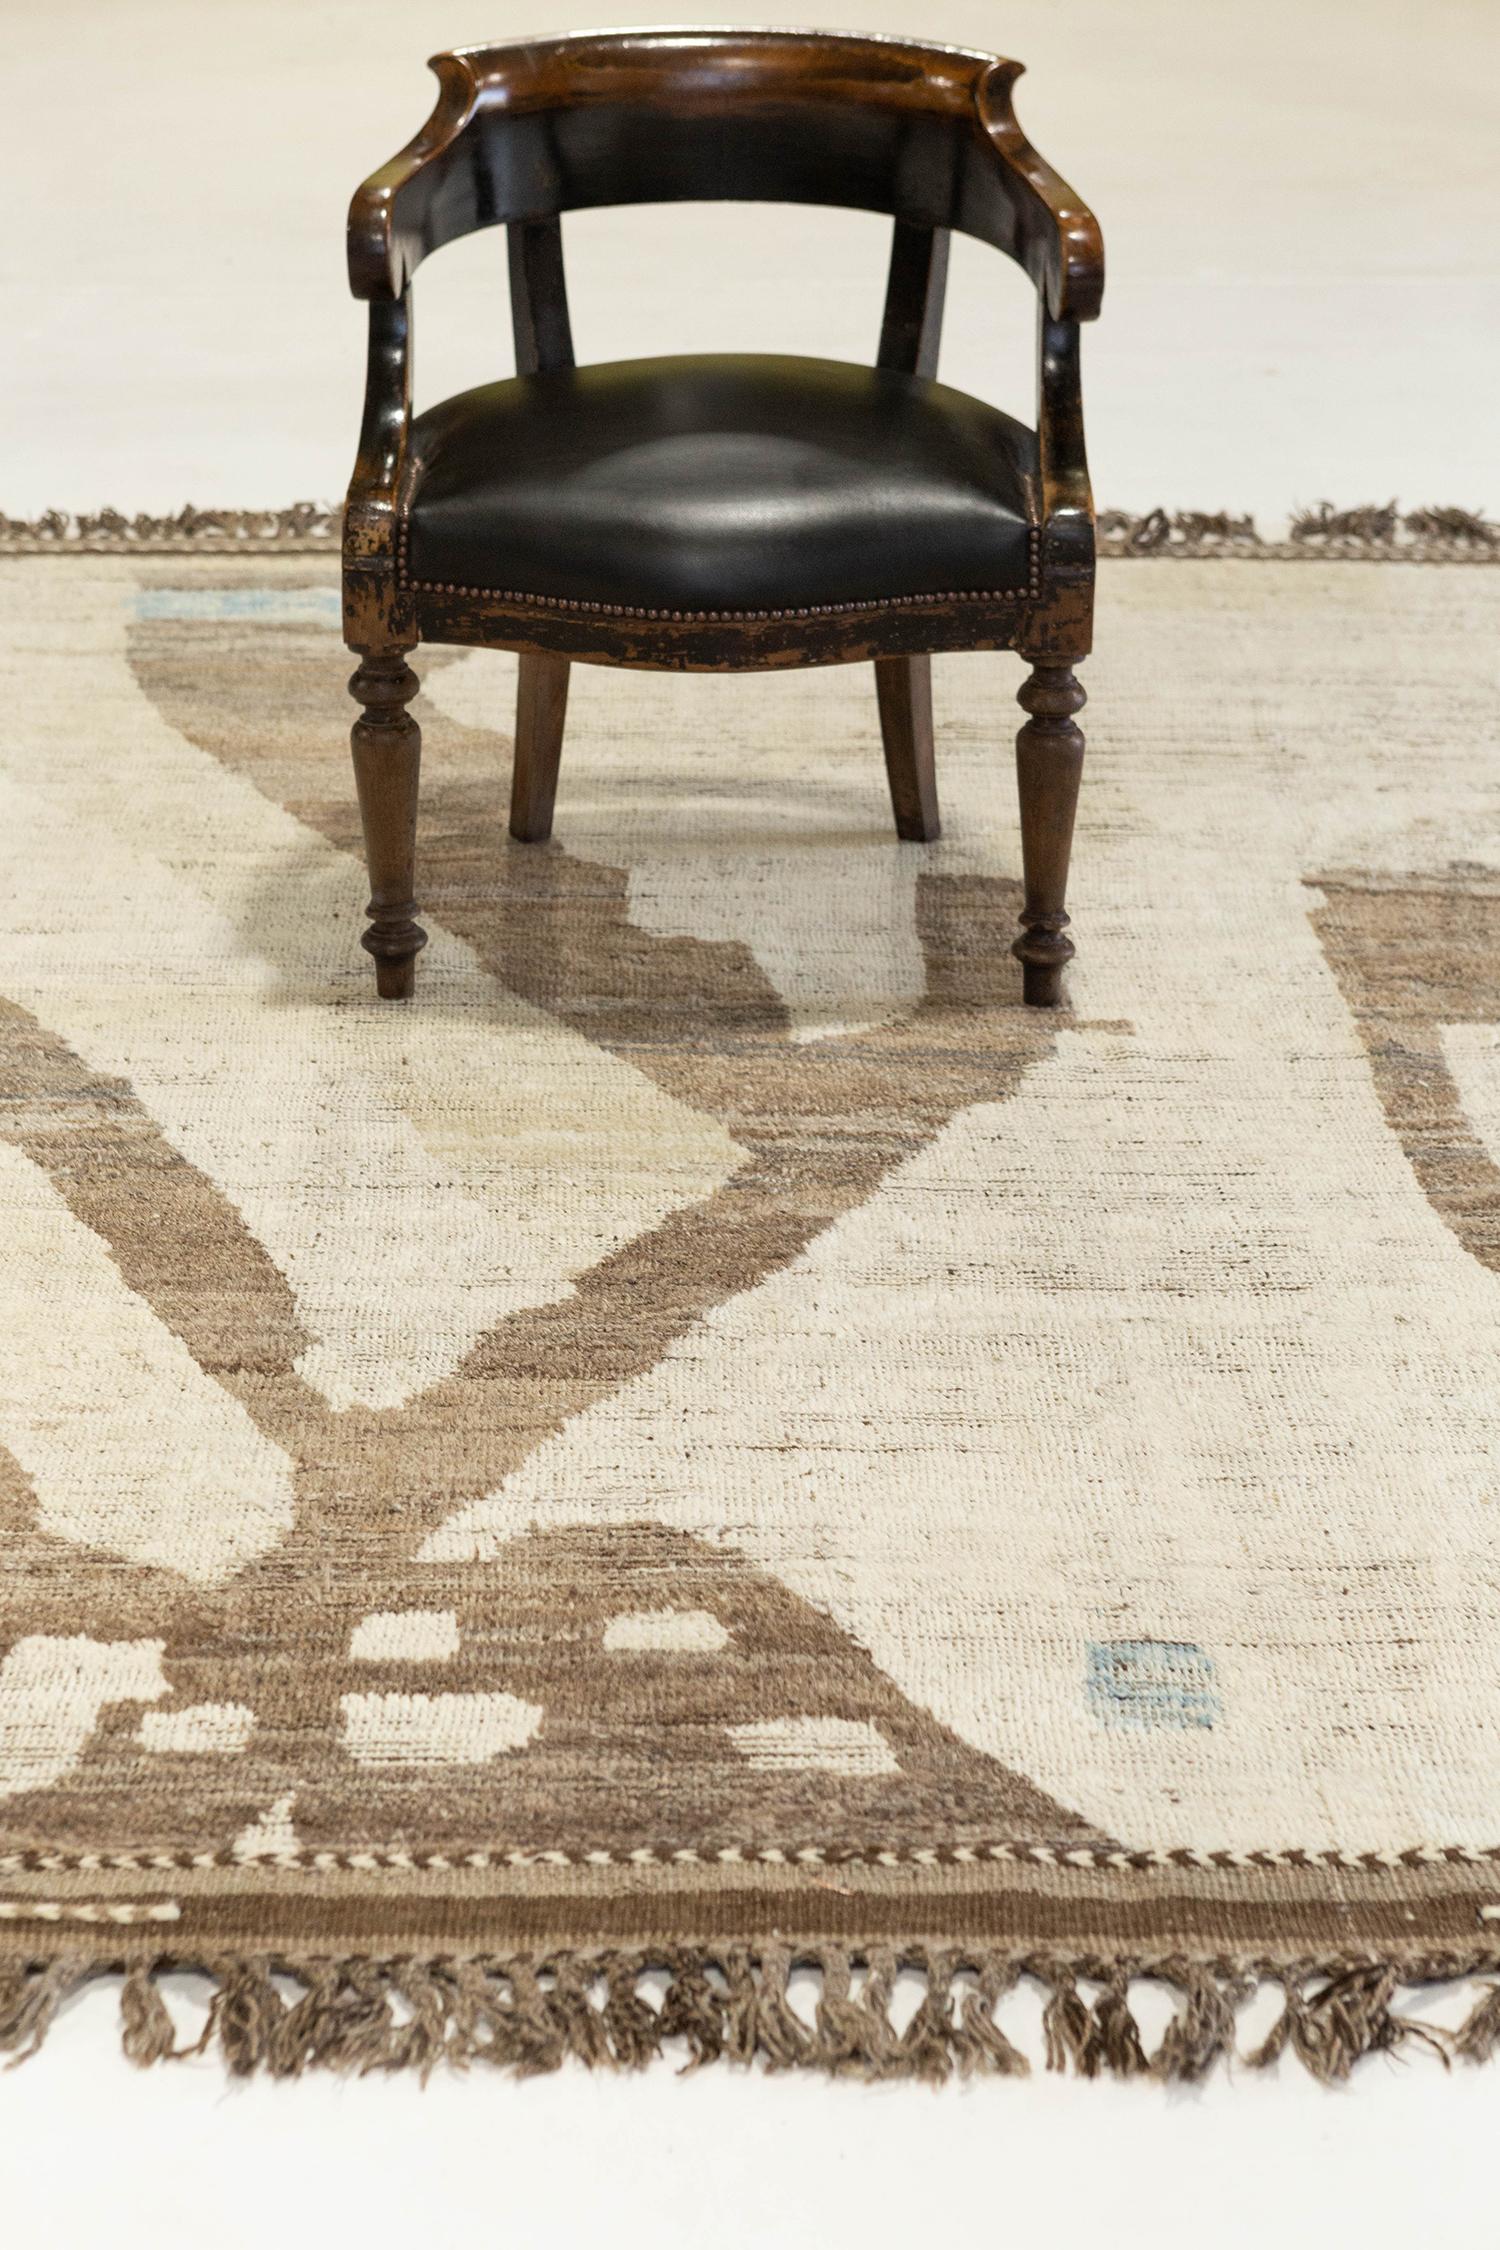 'Meden' is an earth-toned natural wool rug and a modern interpretation of the Moroccan world. This rugs irregular shapes and colors resemble the fibers of nature and their ability to be used for crafts such as cords and basketry. Designed in Los